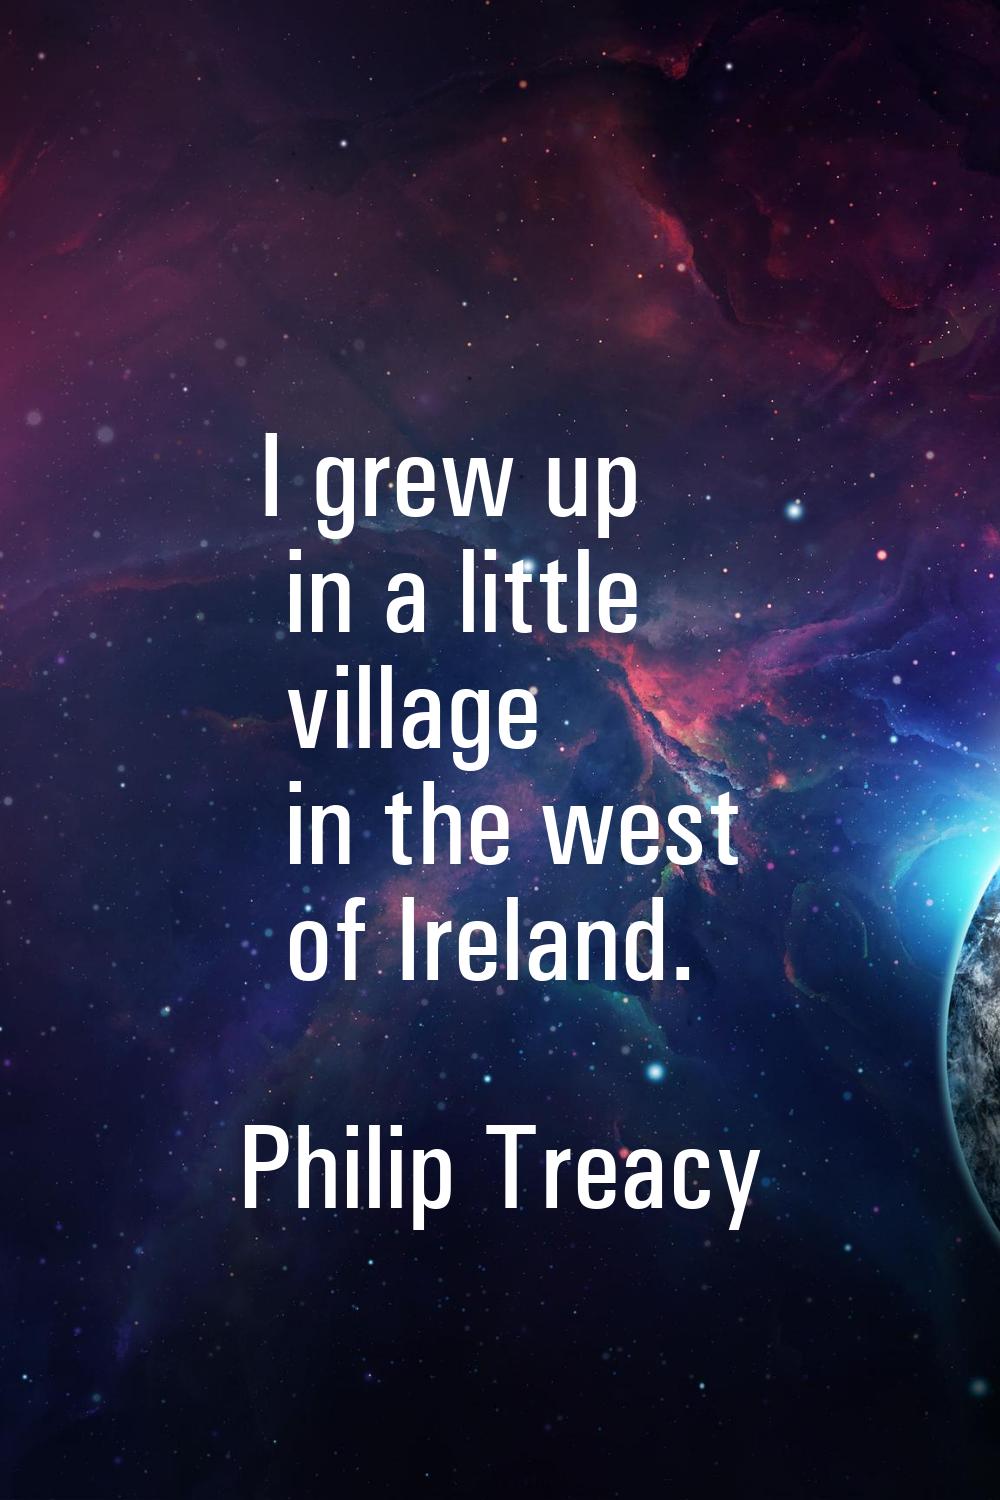 I grew up in a little village in the west of Ireland.